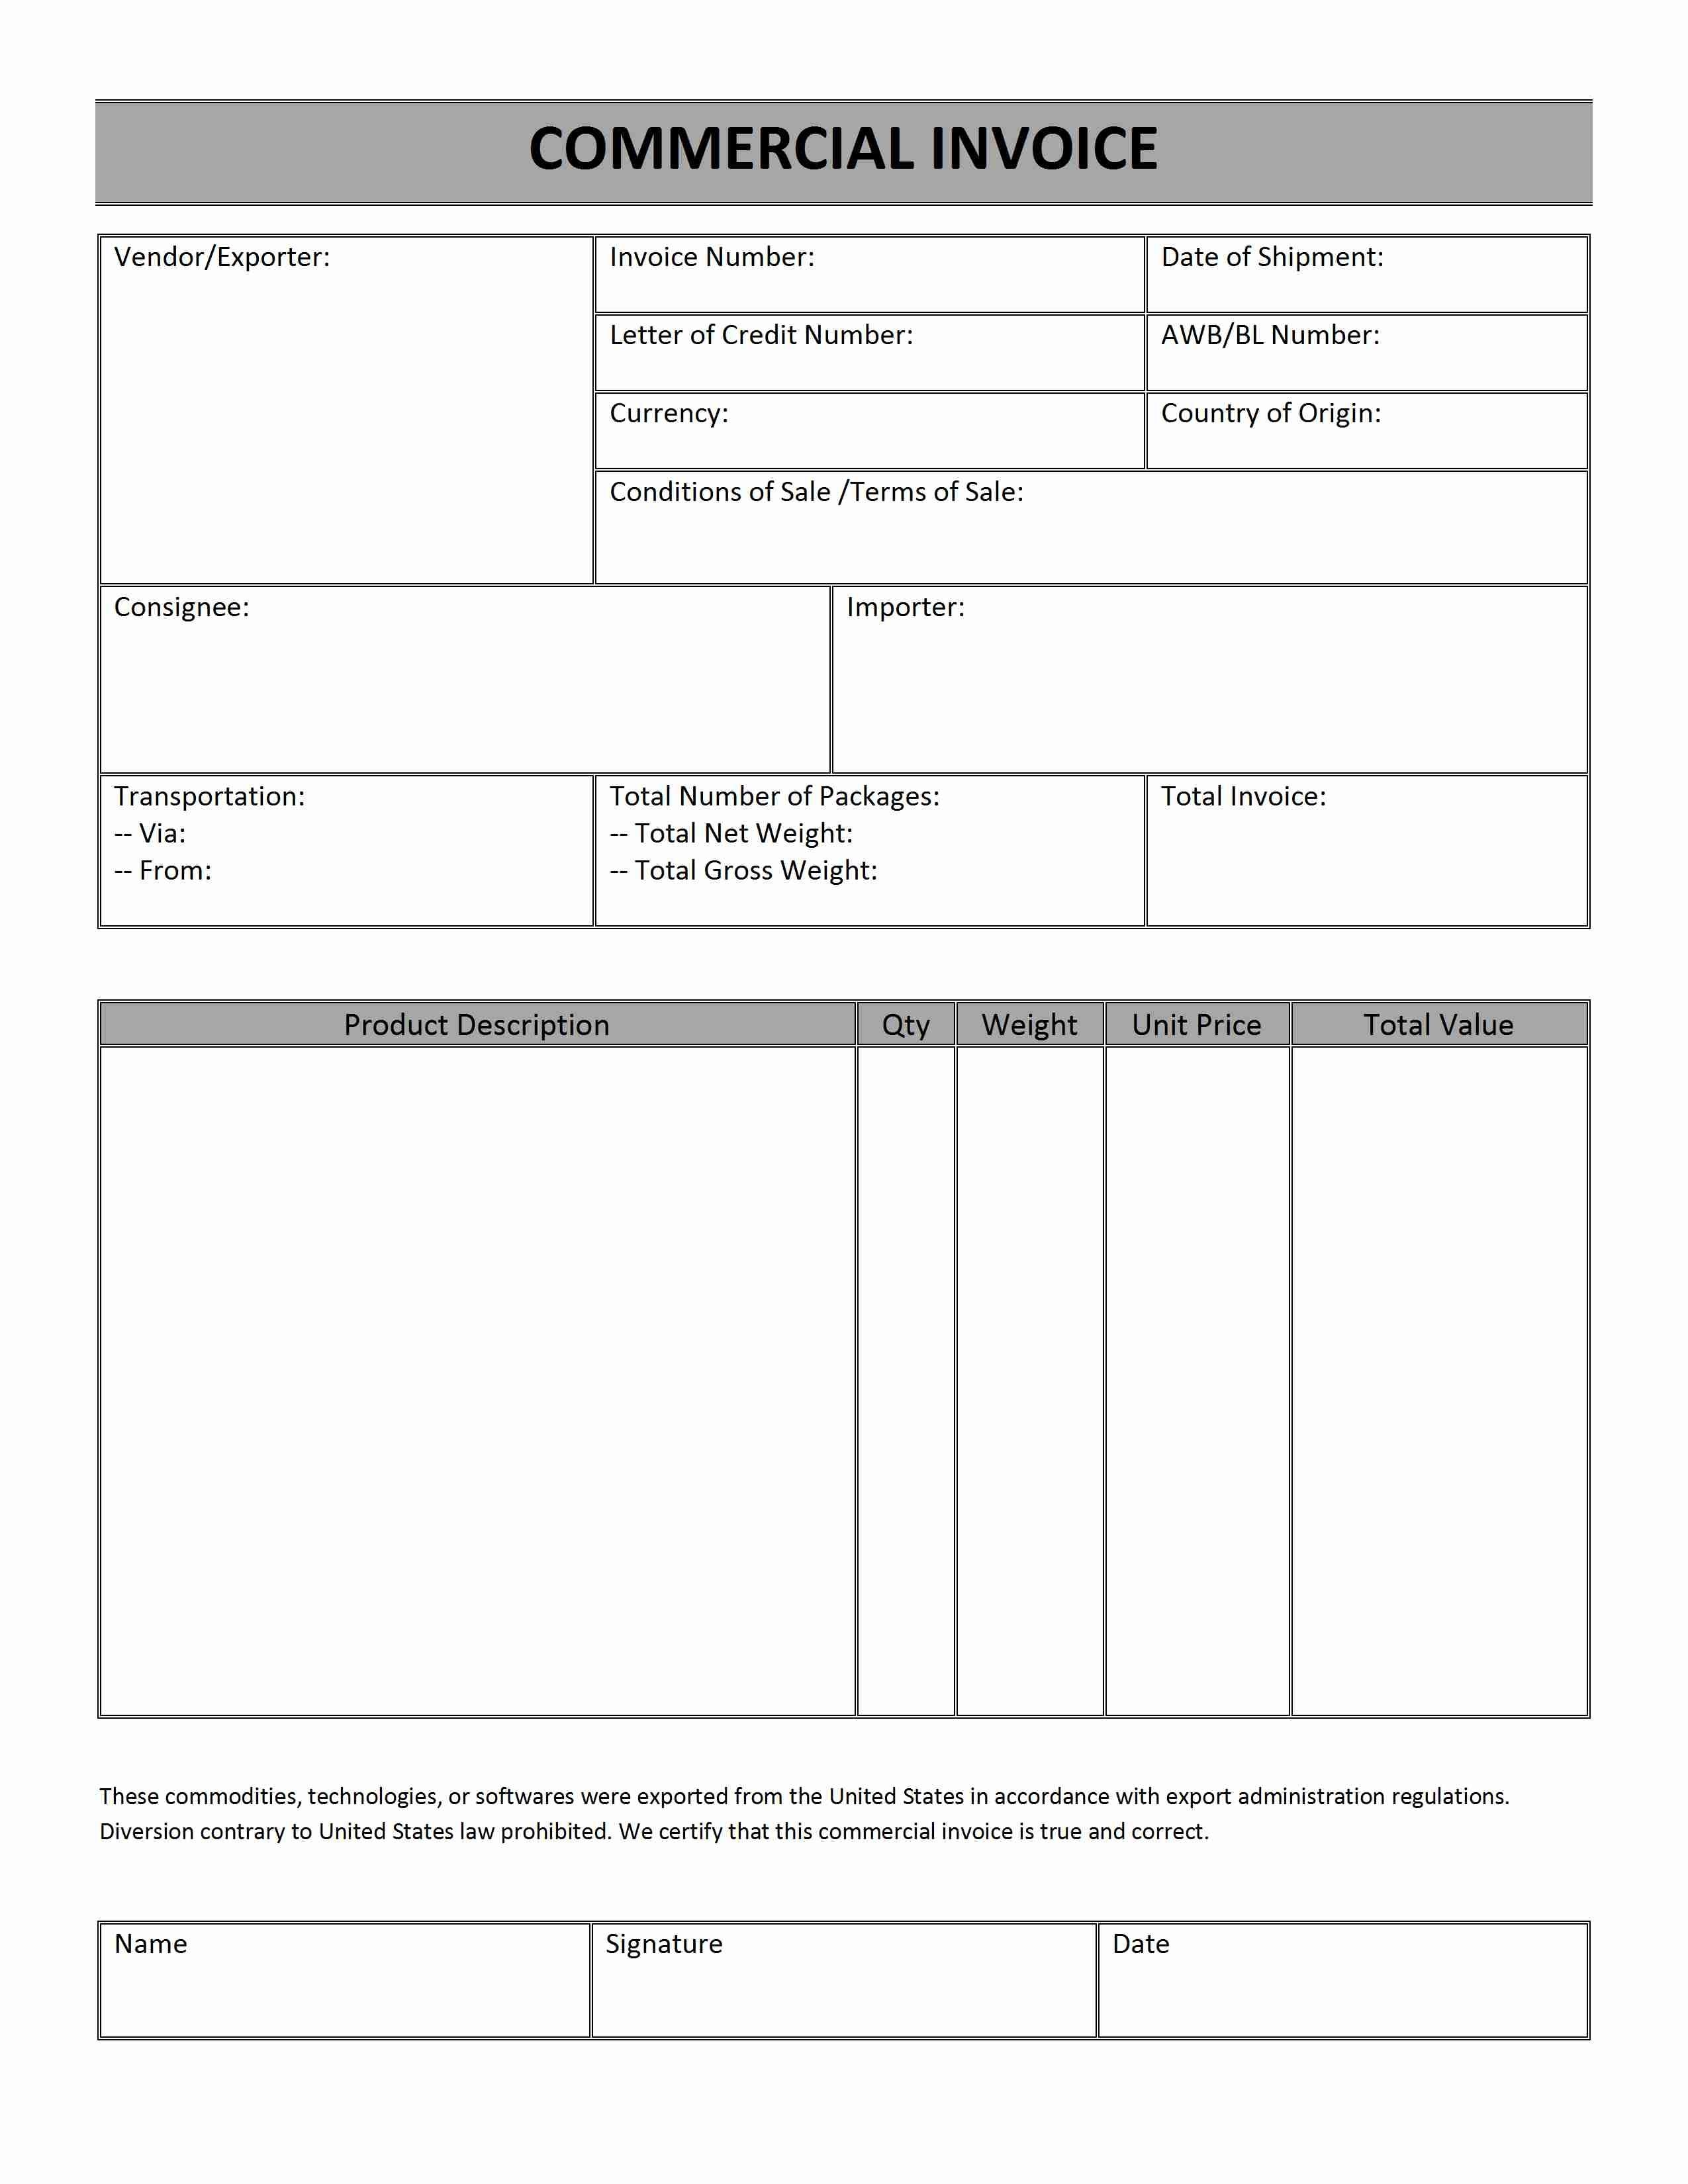 commercial invoice word templates free word templates ms standard commercial invoice form